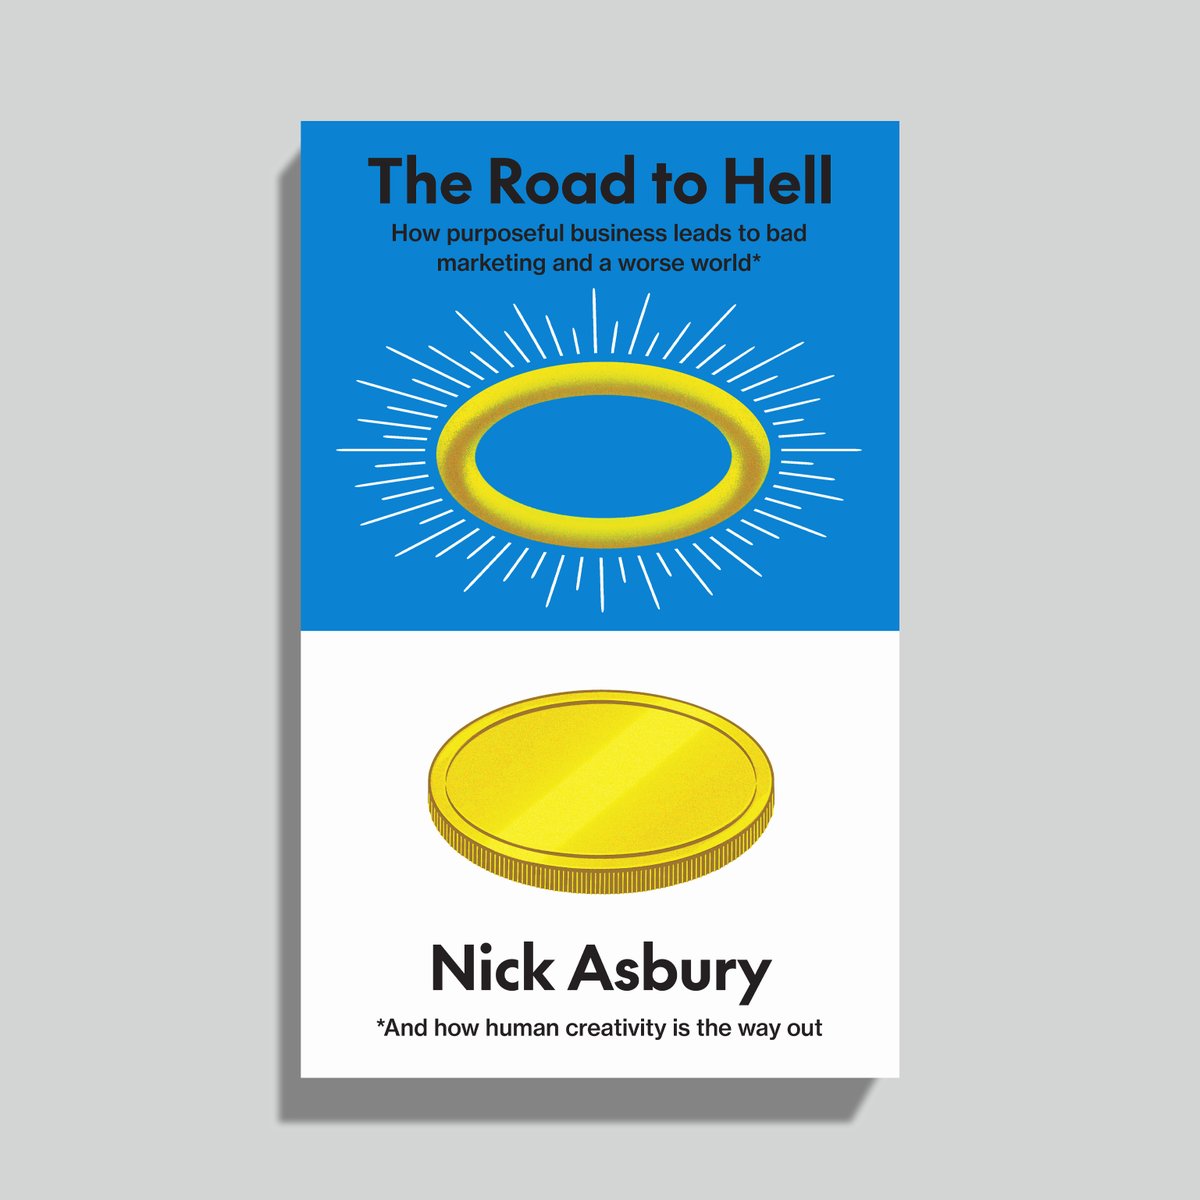 Excerpt from my @CreativeReview article on the journey to The Road to Hell – you'll need a (worthwhile) subscription to read the whole thing. Pre-orders should start landing in about a week's time. creativereview.co.uk/nick-asbury-br…